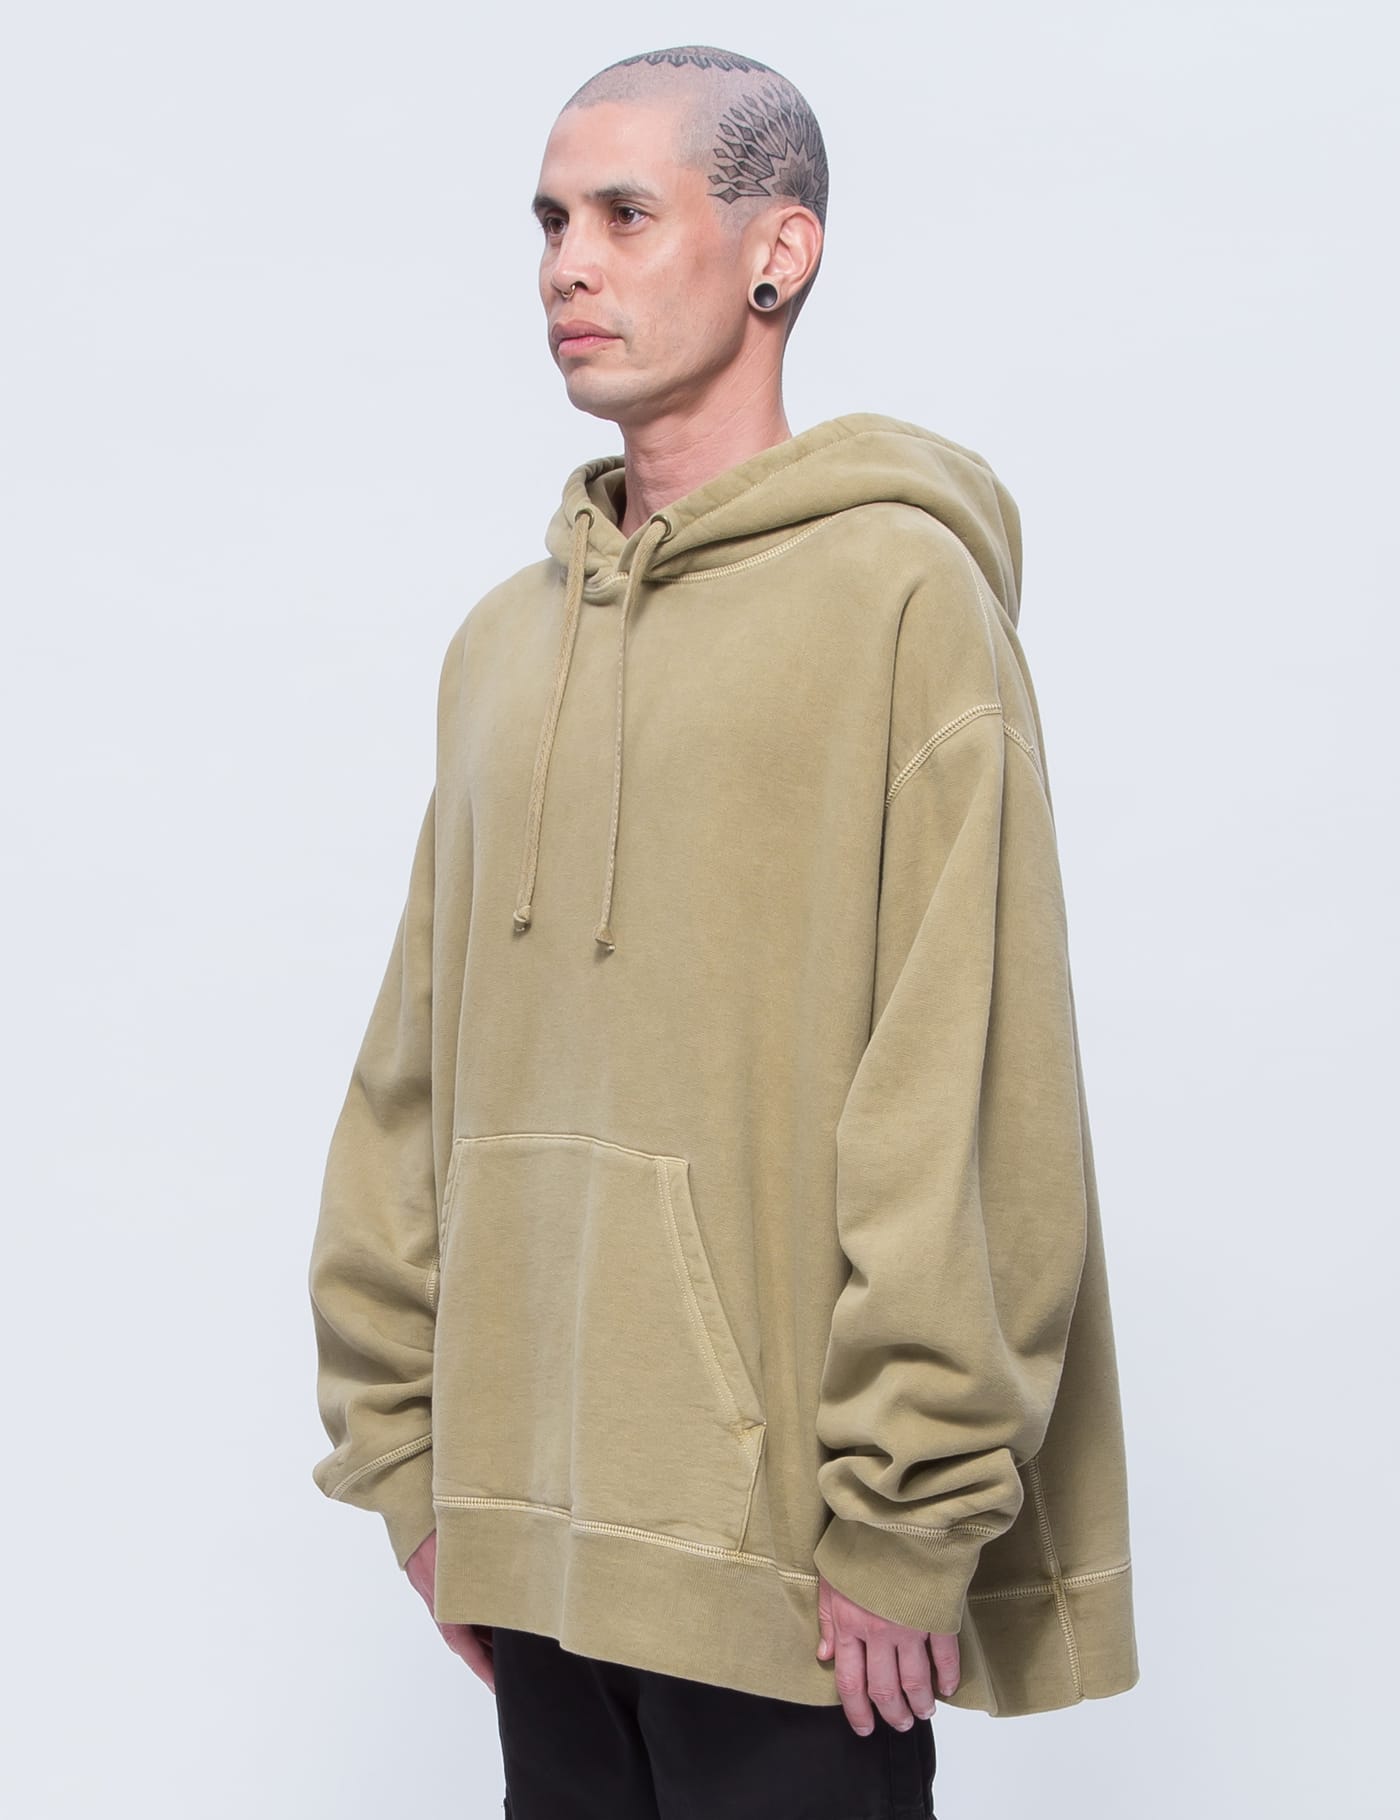 YEEZY Season 3 - Relaxed Fit Hoodie | HBX - Globally Curated 